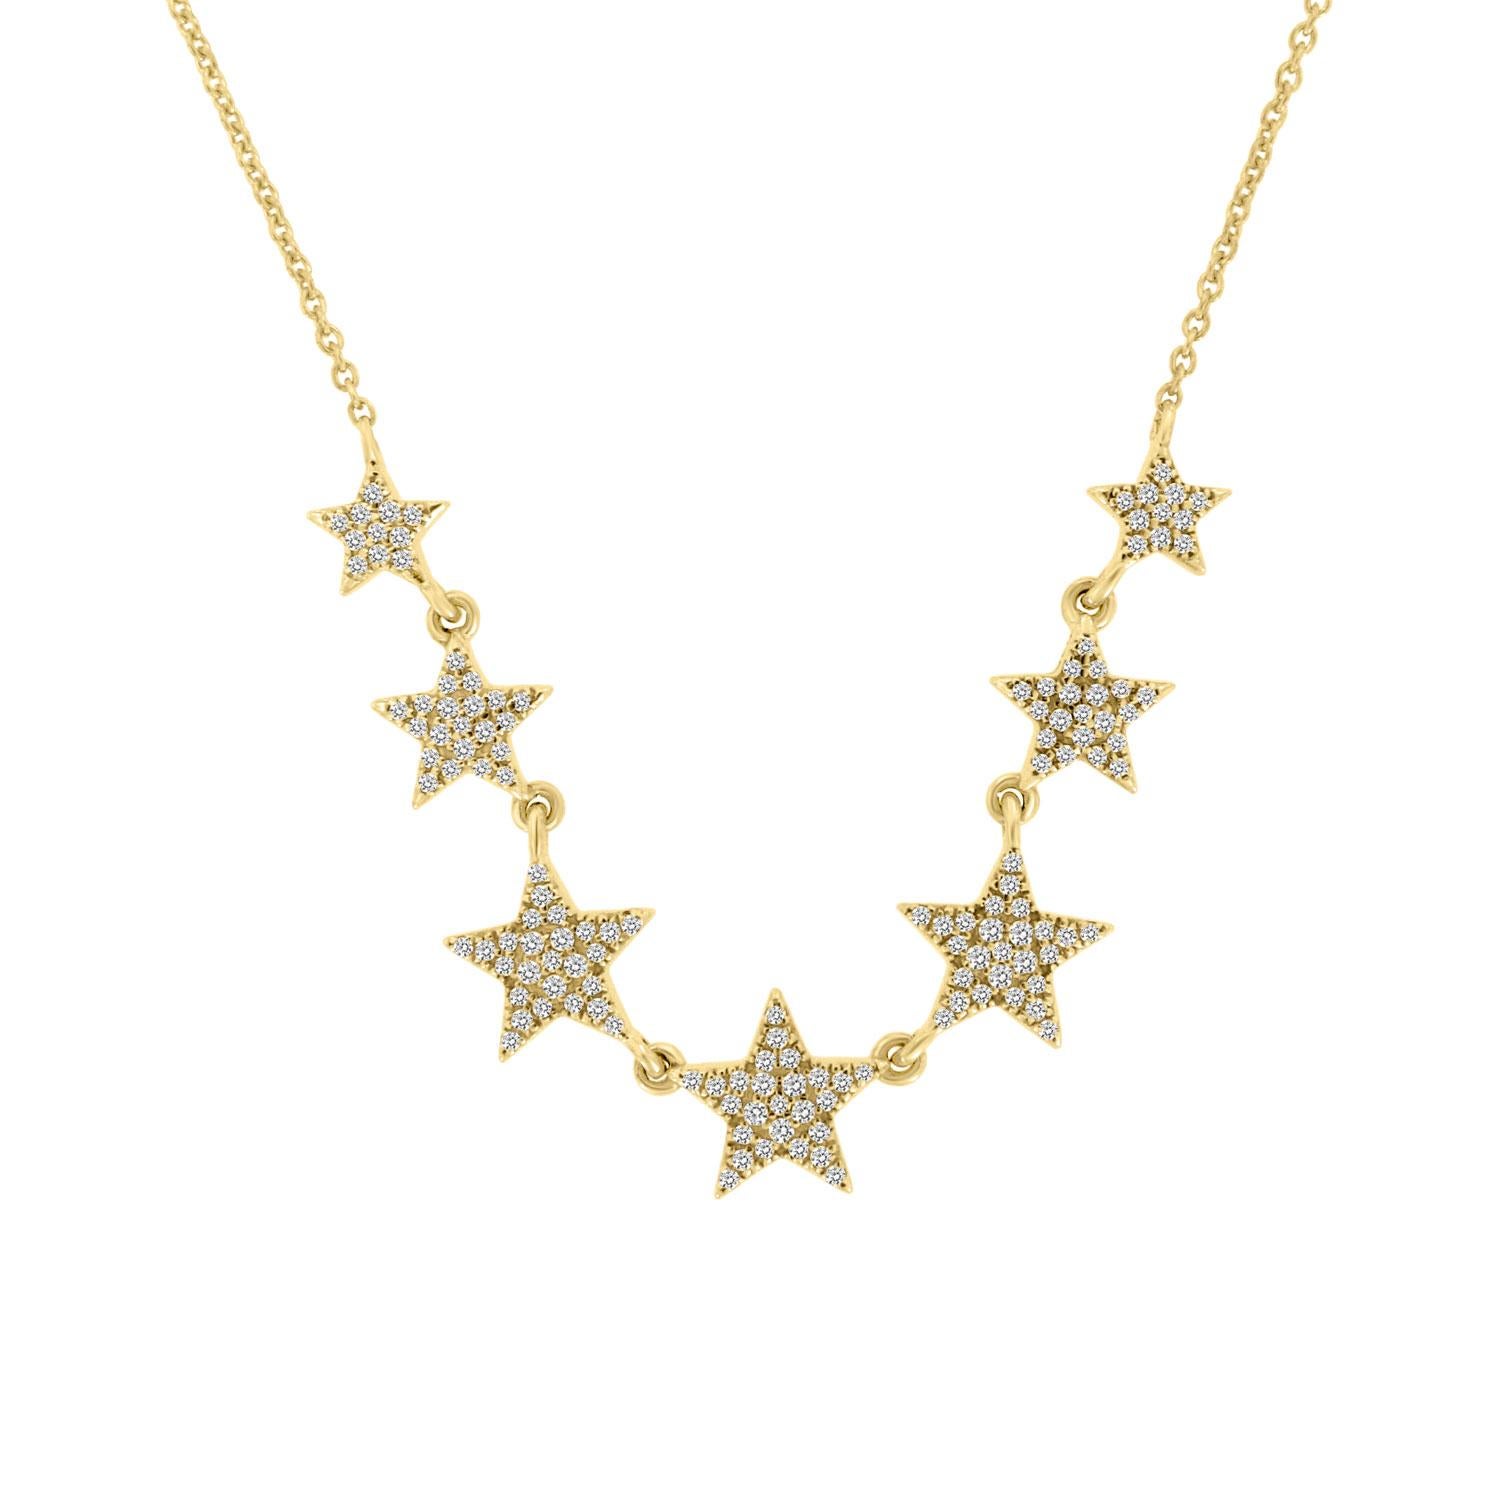 This elegant necklace features 7 diamond stars Micro Prong-set linked to each other via delicate loops. Experience The Difference in Person!

Product details: 

Center Gemstone Type: NATURAL DIAMOND
Center Gemstone Shape: ROUND
Metal: 14K Yellow